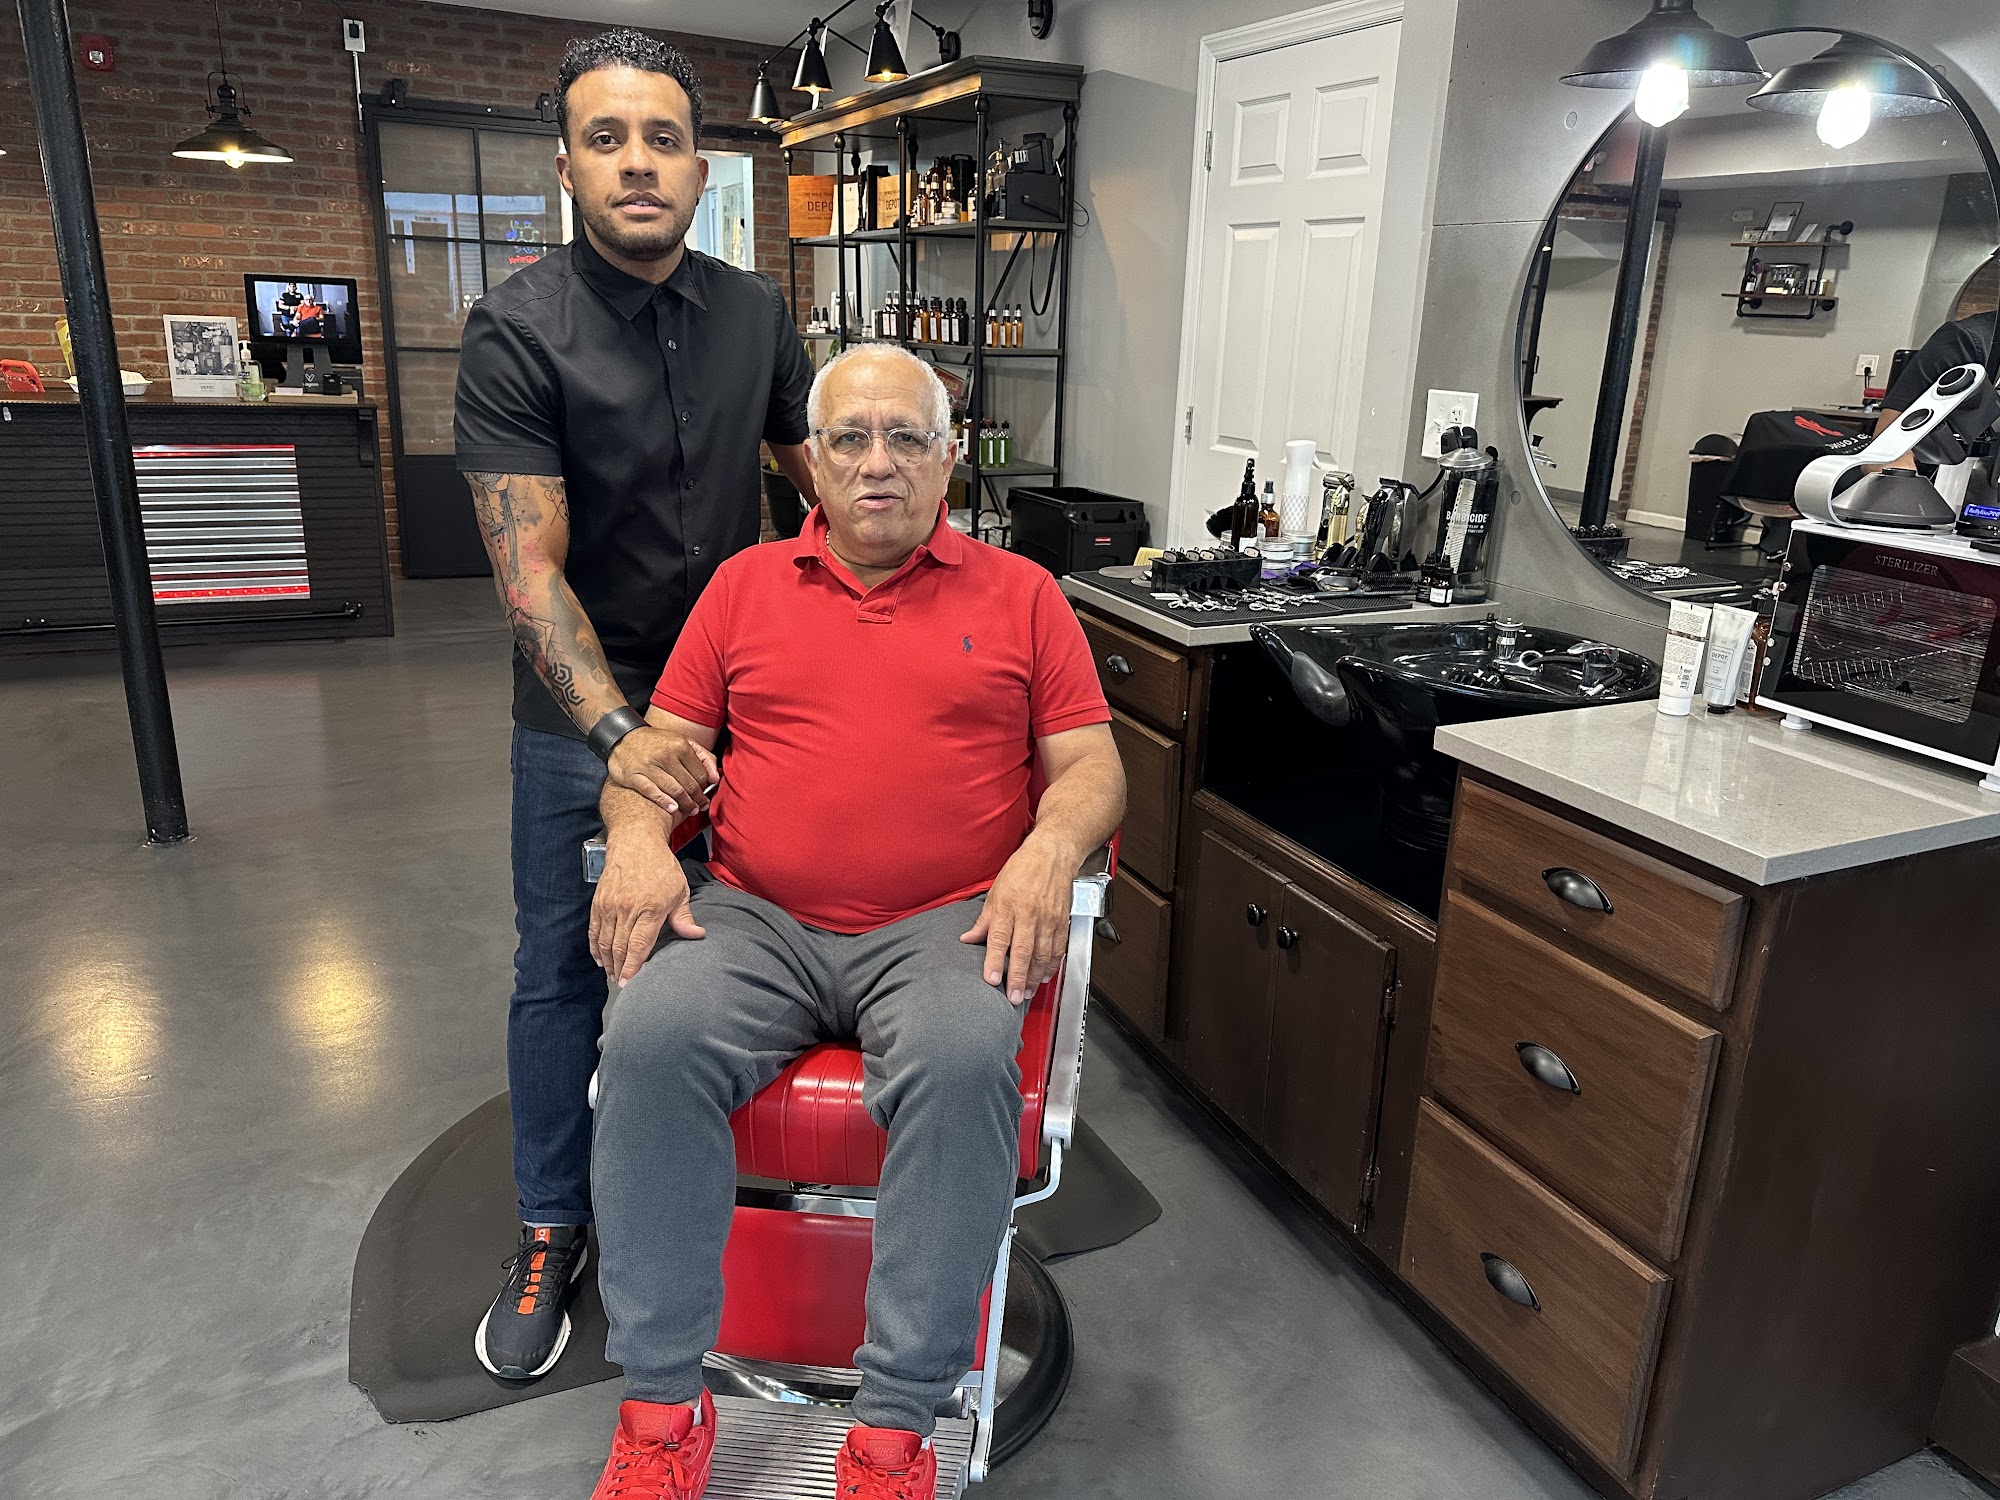 Red lounge Barber Inc. 40 N Main St, Wharton New Jersey 07885